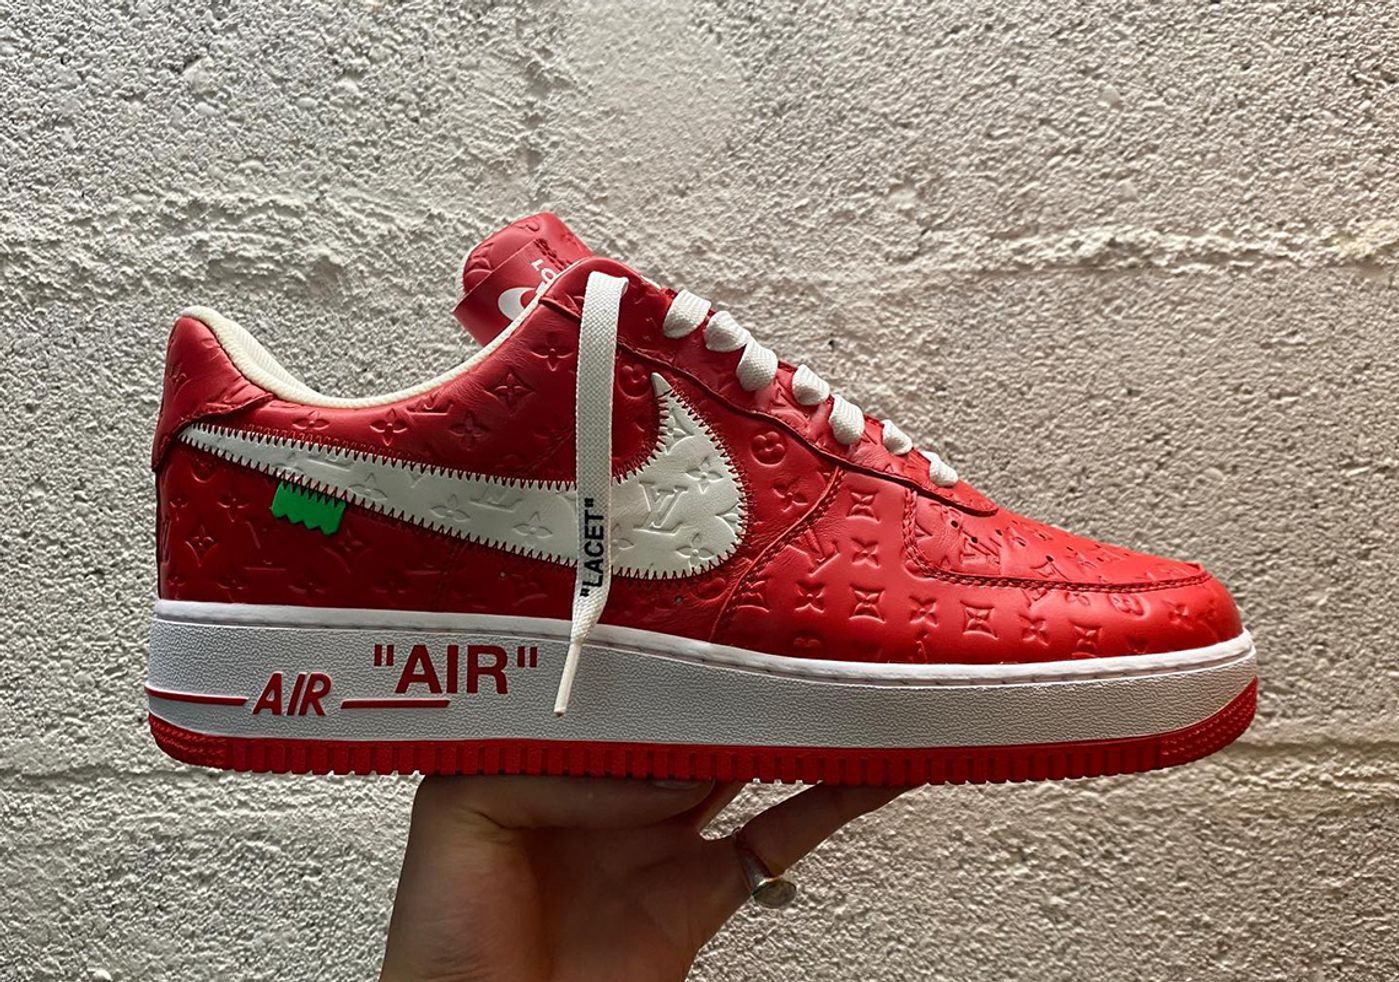 Louis Vuitton x OffWhite x Nike Air Force 1 Release Date, Price, And